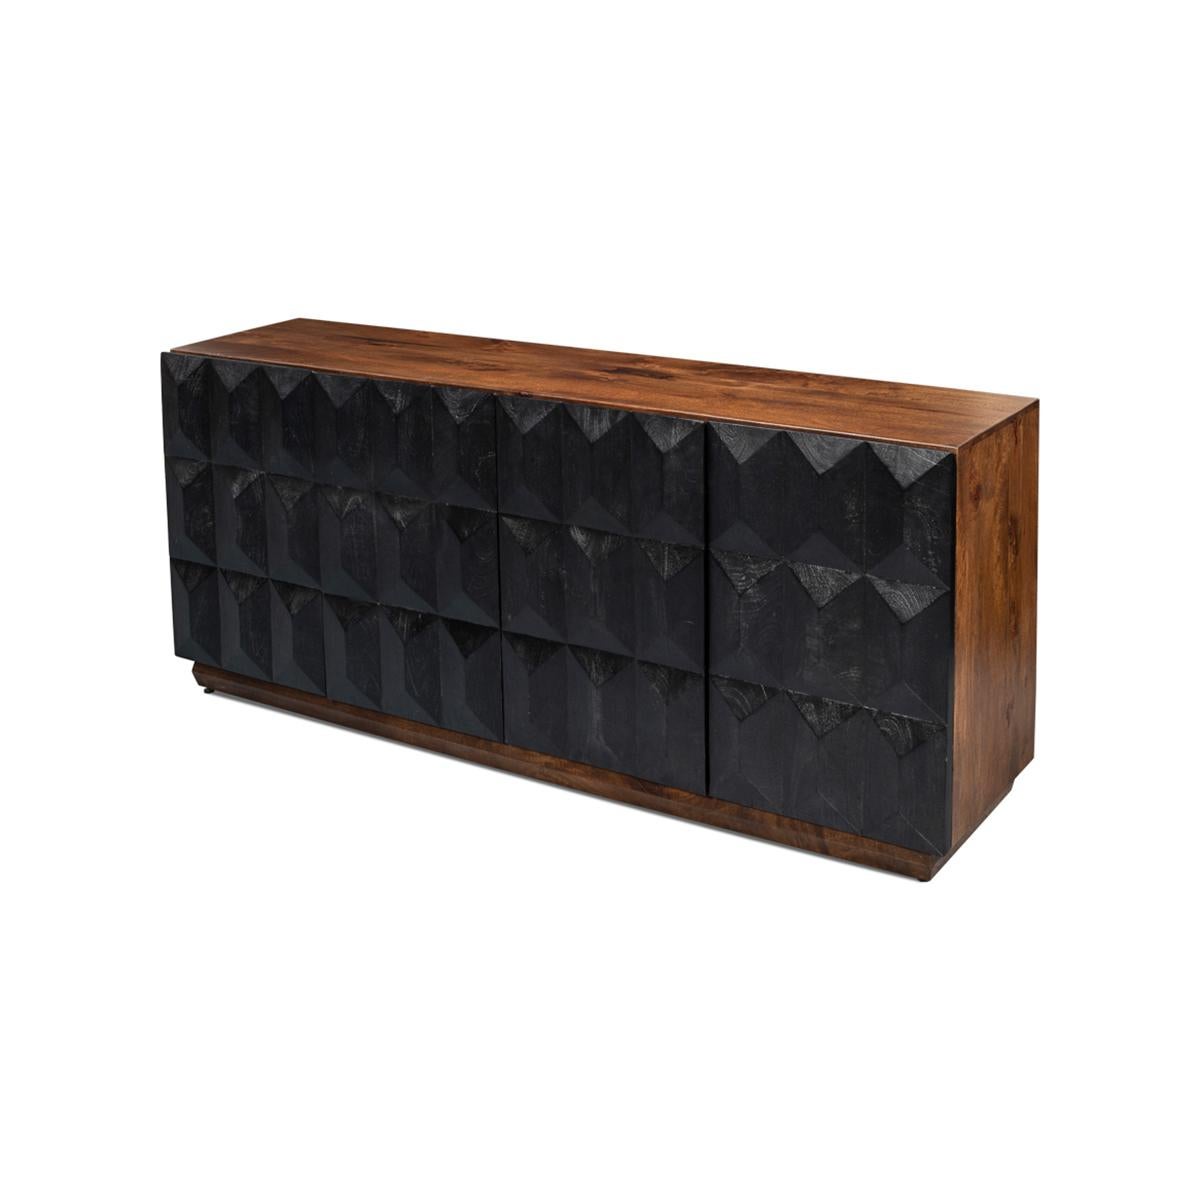 Asian Modern Architectural Sideboard For Sale